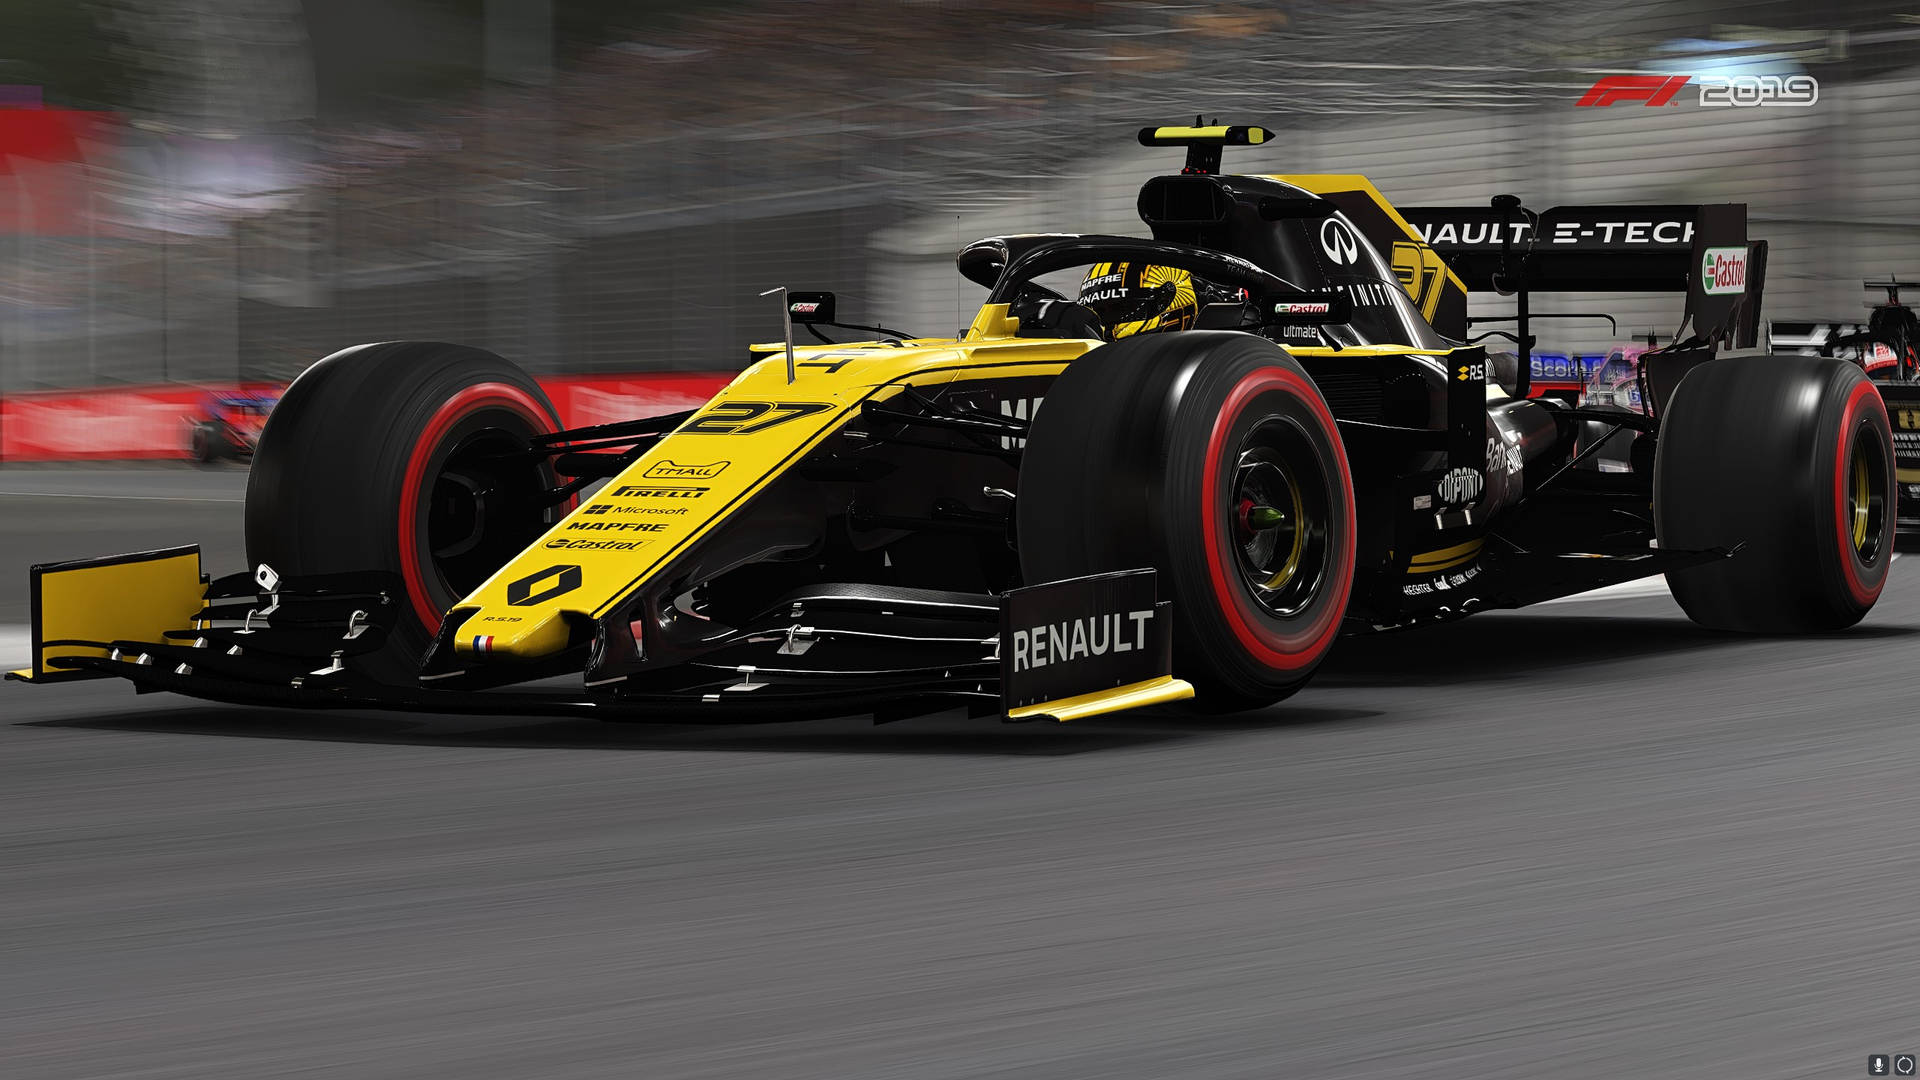 Renault #27 Car In F1 2019 Background